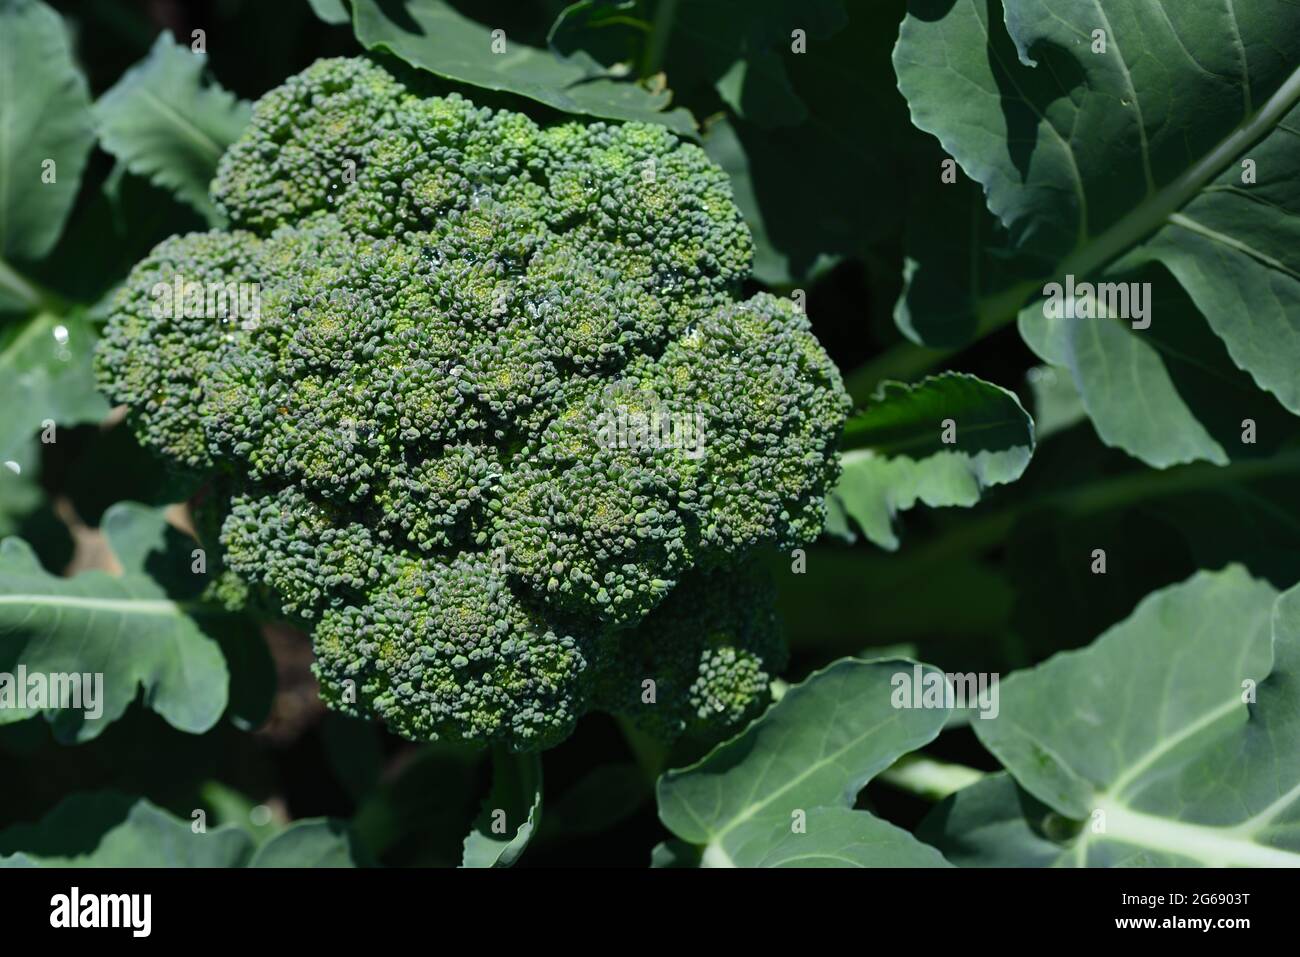 A green broccoli grows in the field and is ready to be harvested, with its florets and many leaves around it Stock Photo